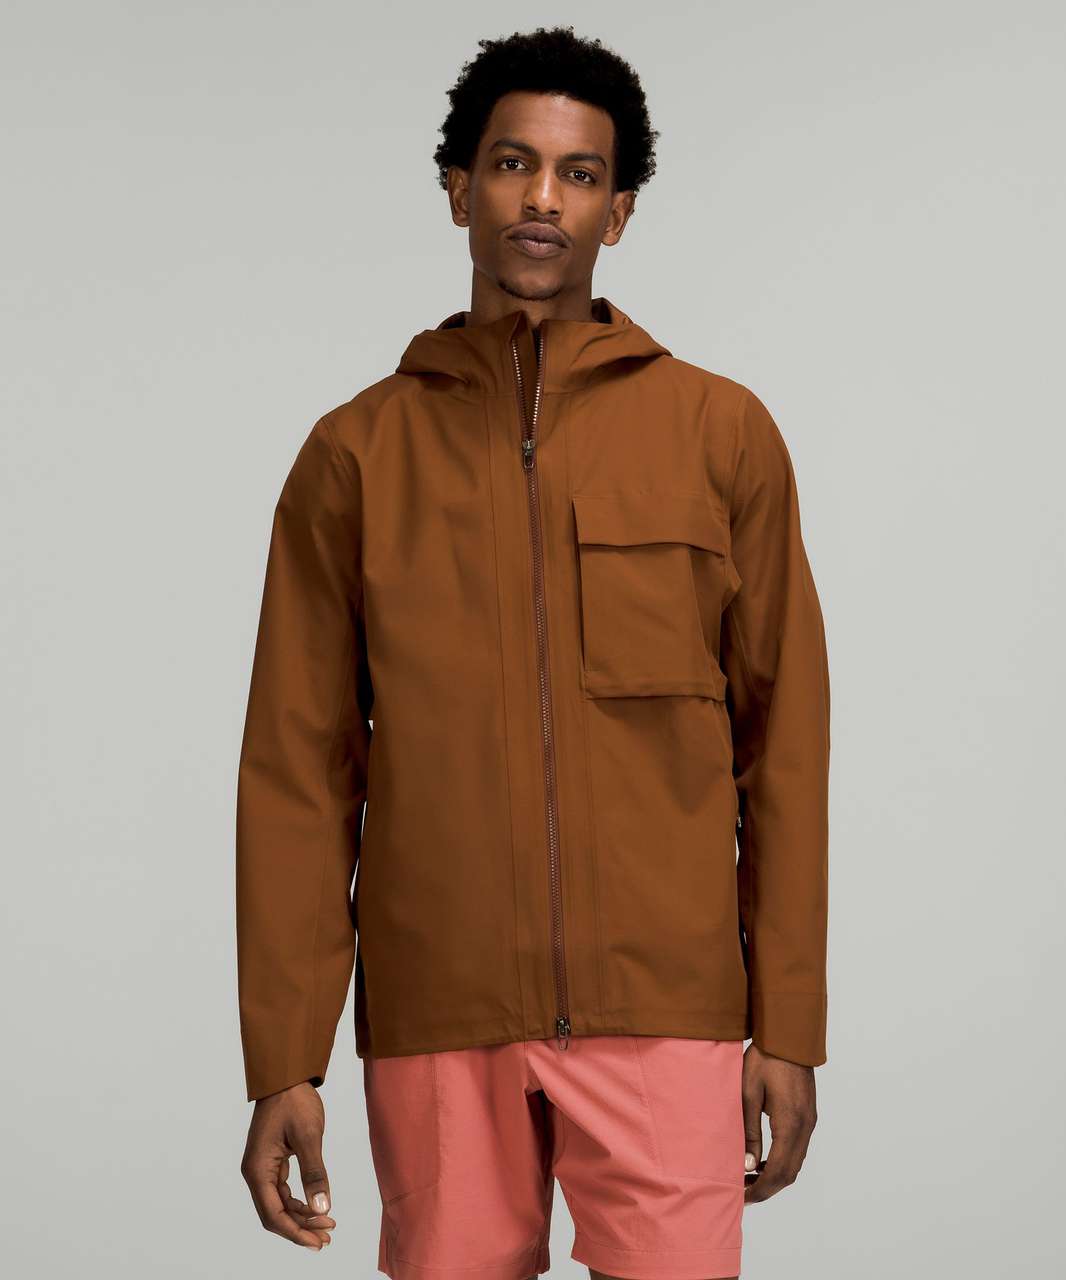 Lululemon Outpour StretchSeal Jacket - Roasted Brown